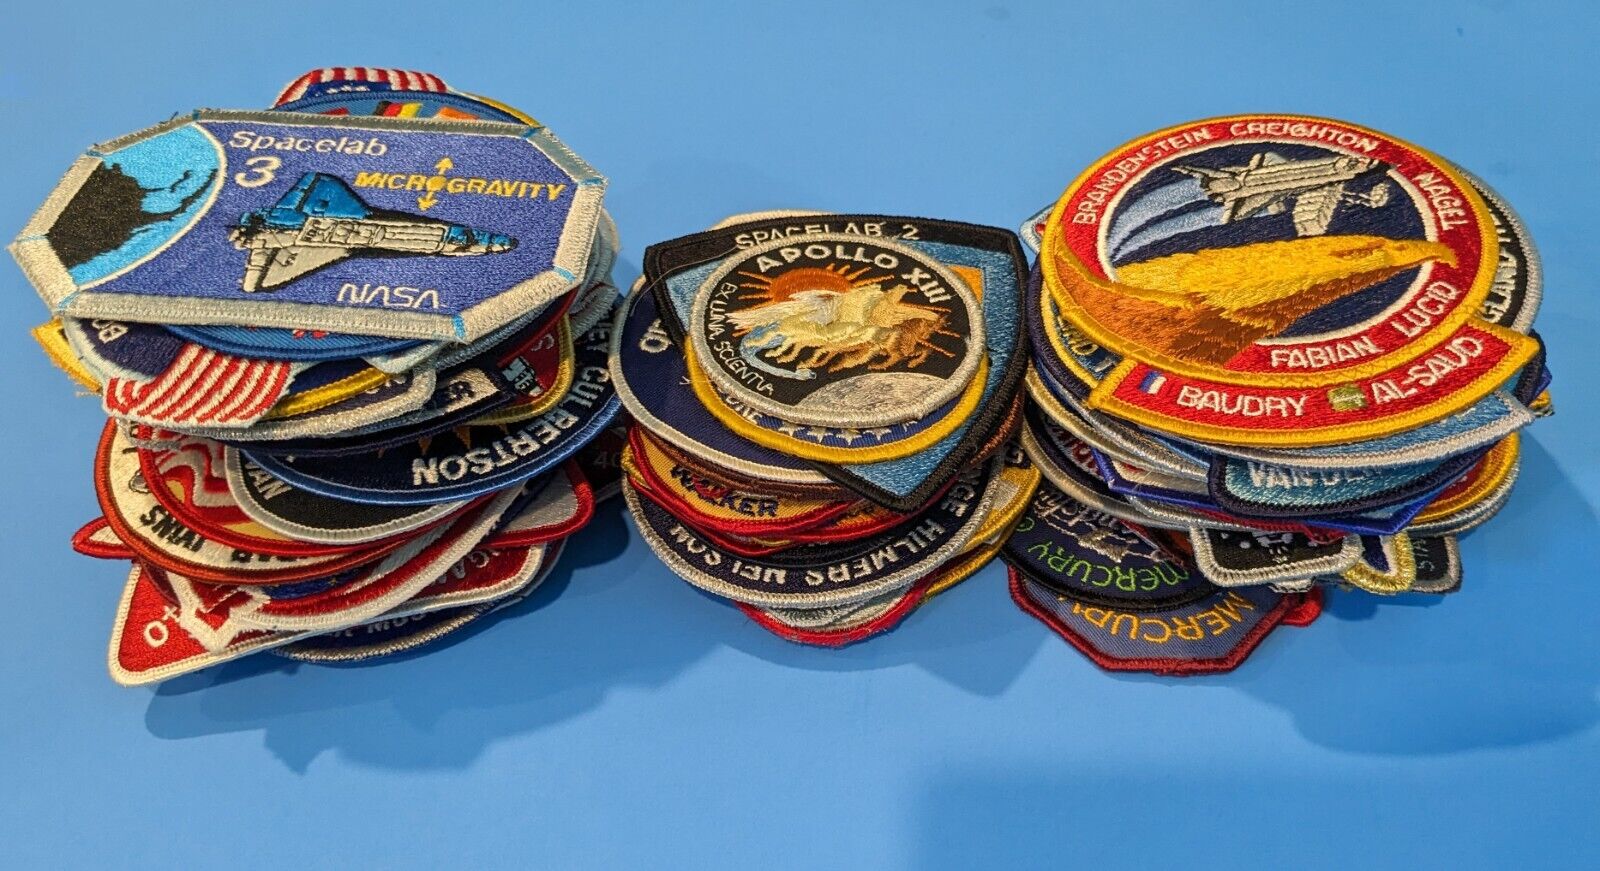 132 Different Vintage NASA Patch Collection - See Detailed Pictures - Fast Ship